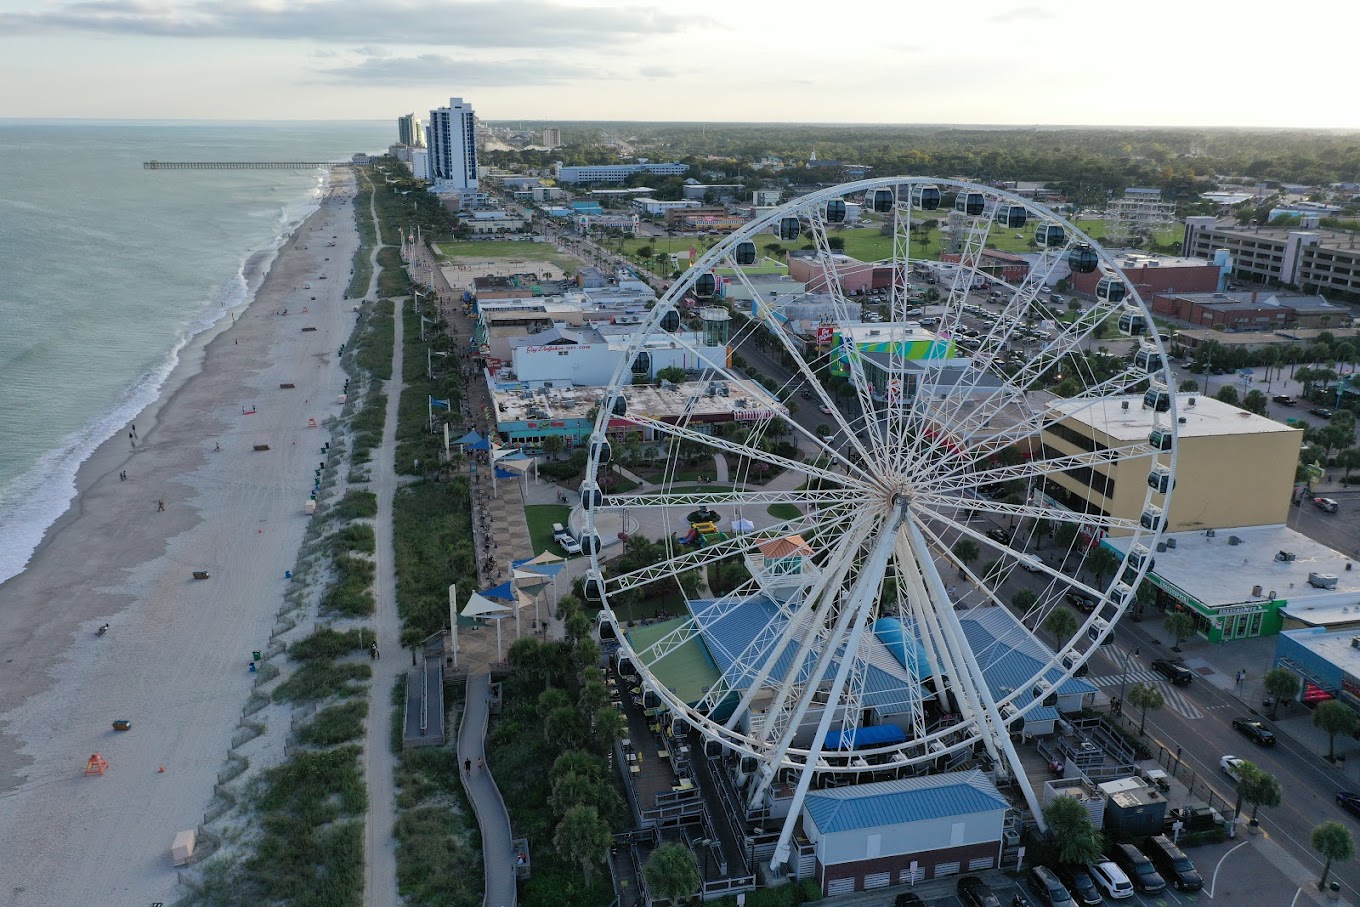 The Ultimate SkyWheel Experience